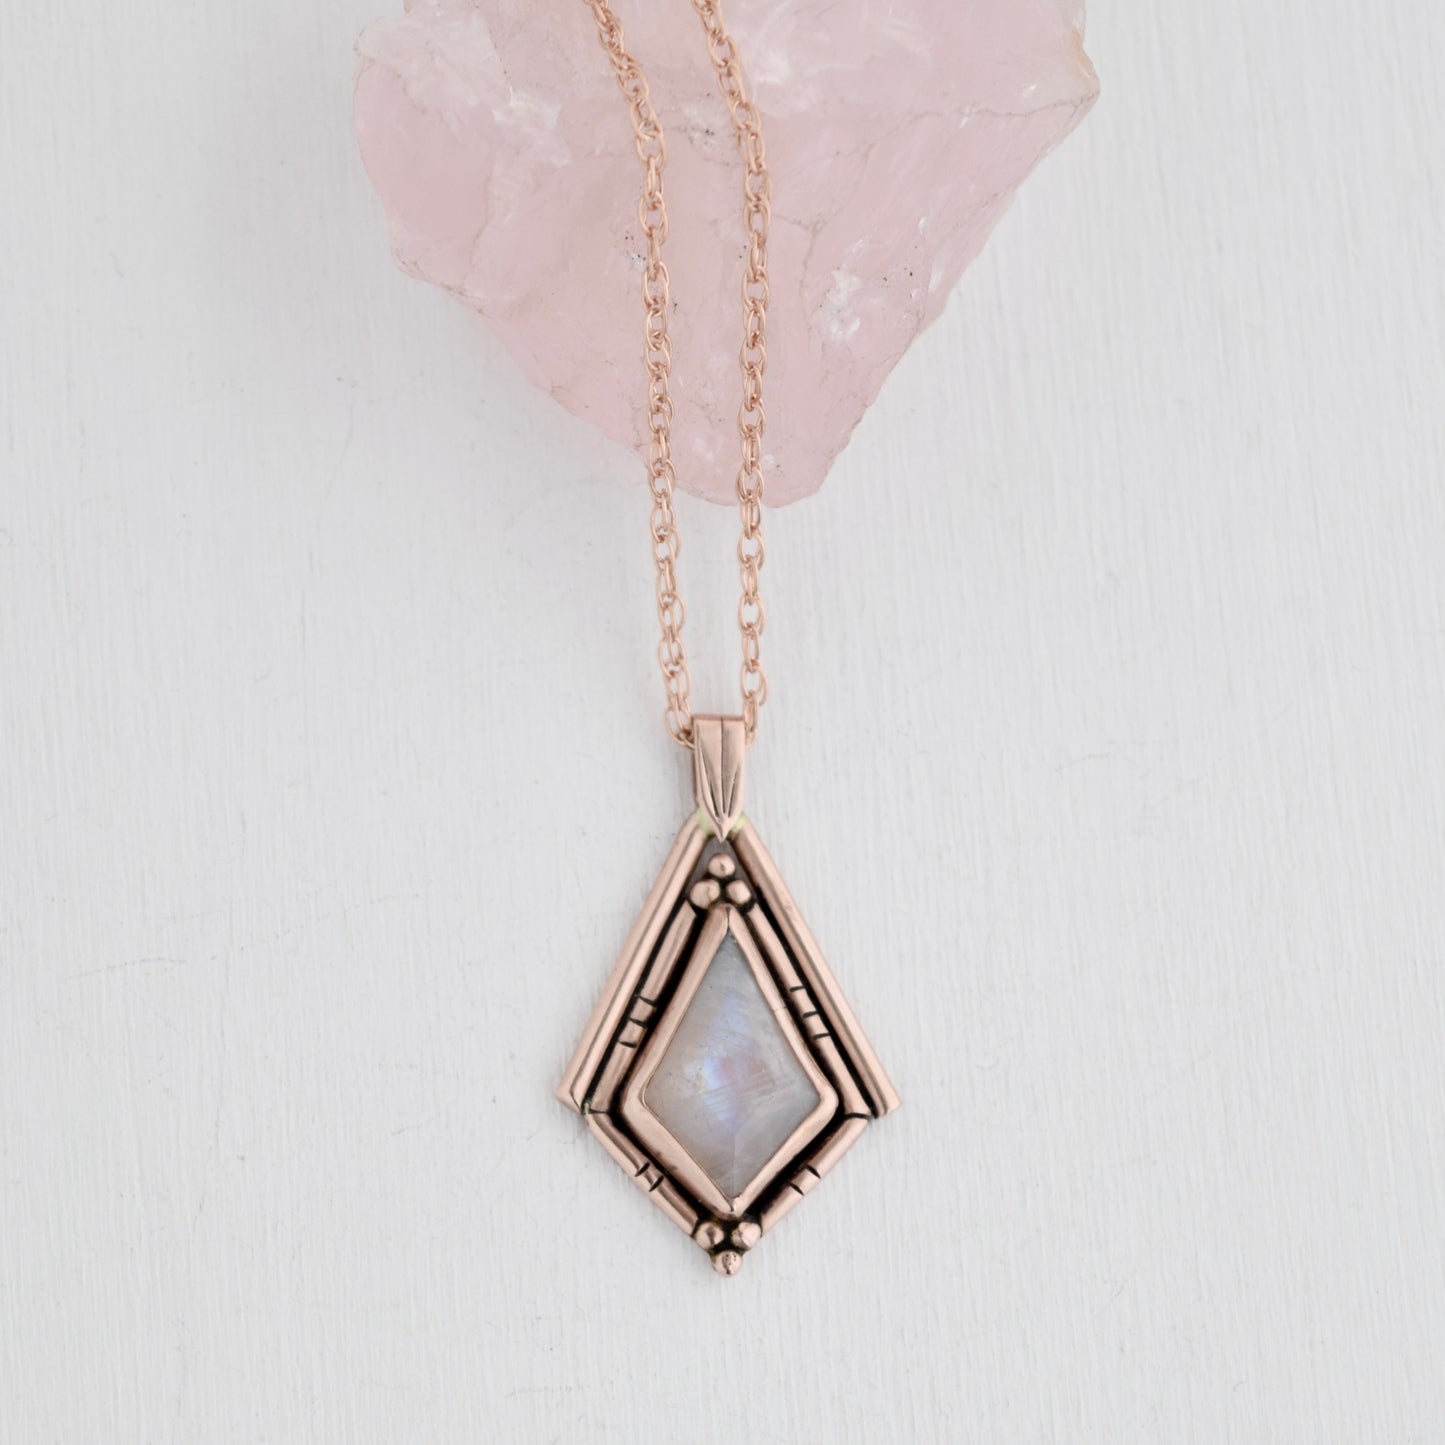 North Star Necklace with 14k Solid Rose Gold, Rose Gold Fill Chain, and Rainbow Moonstone